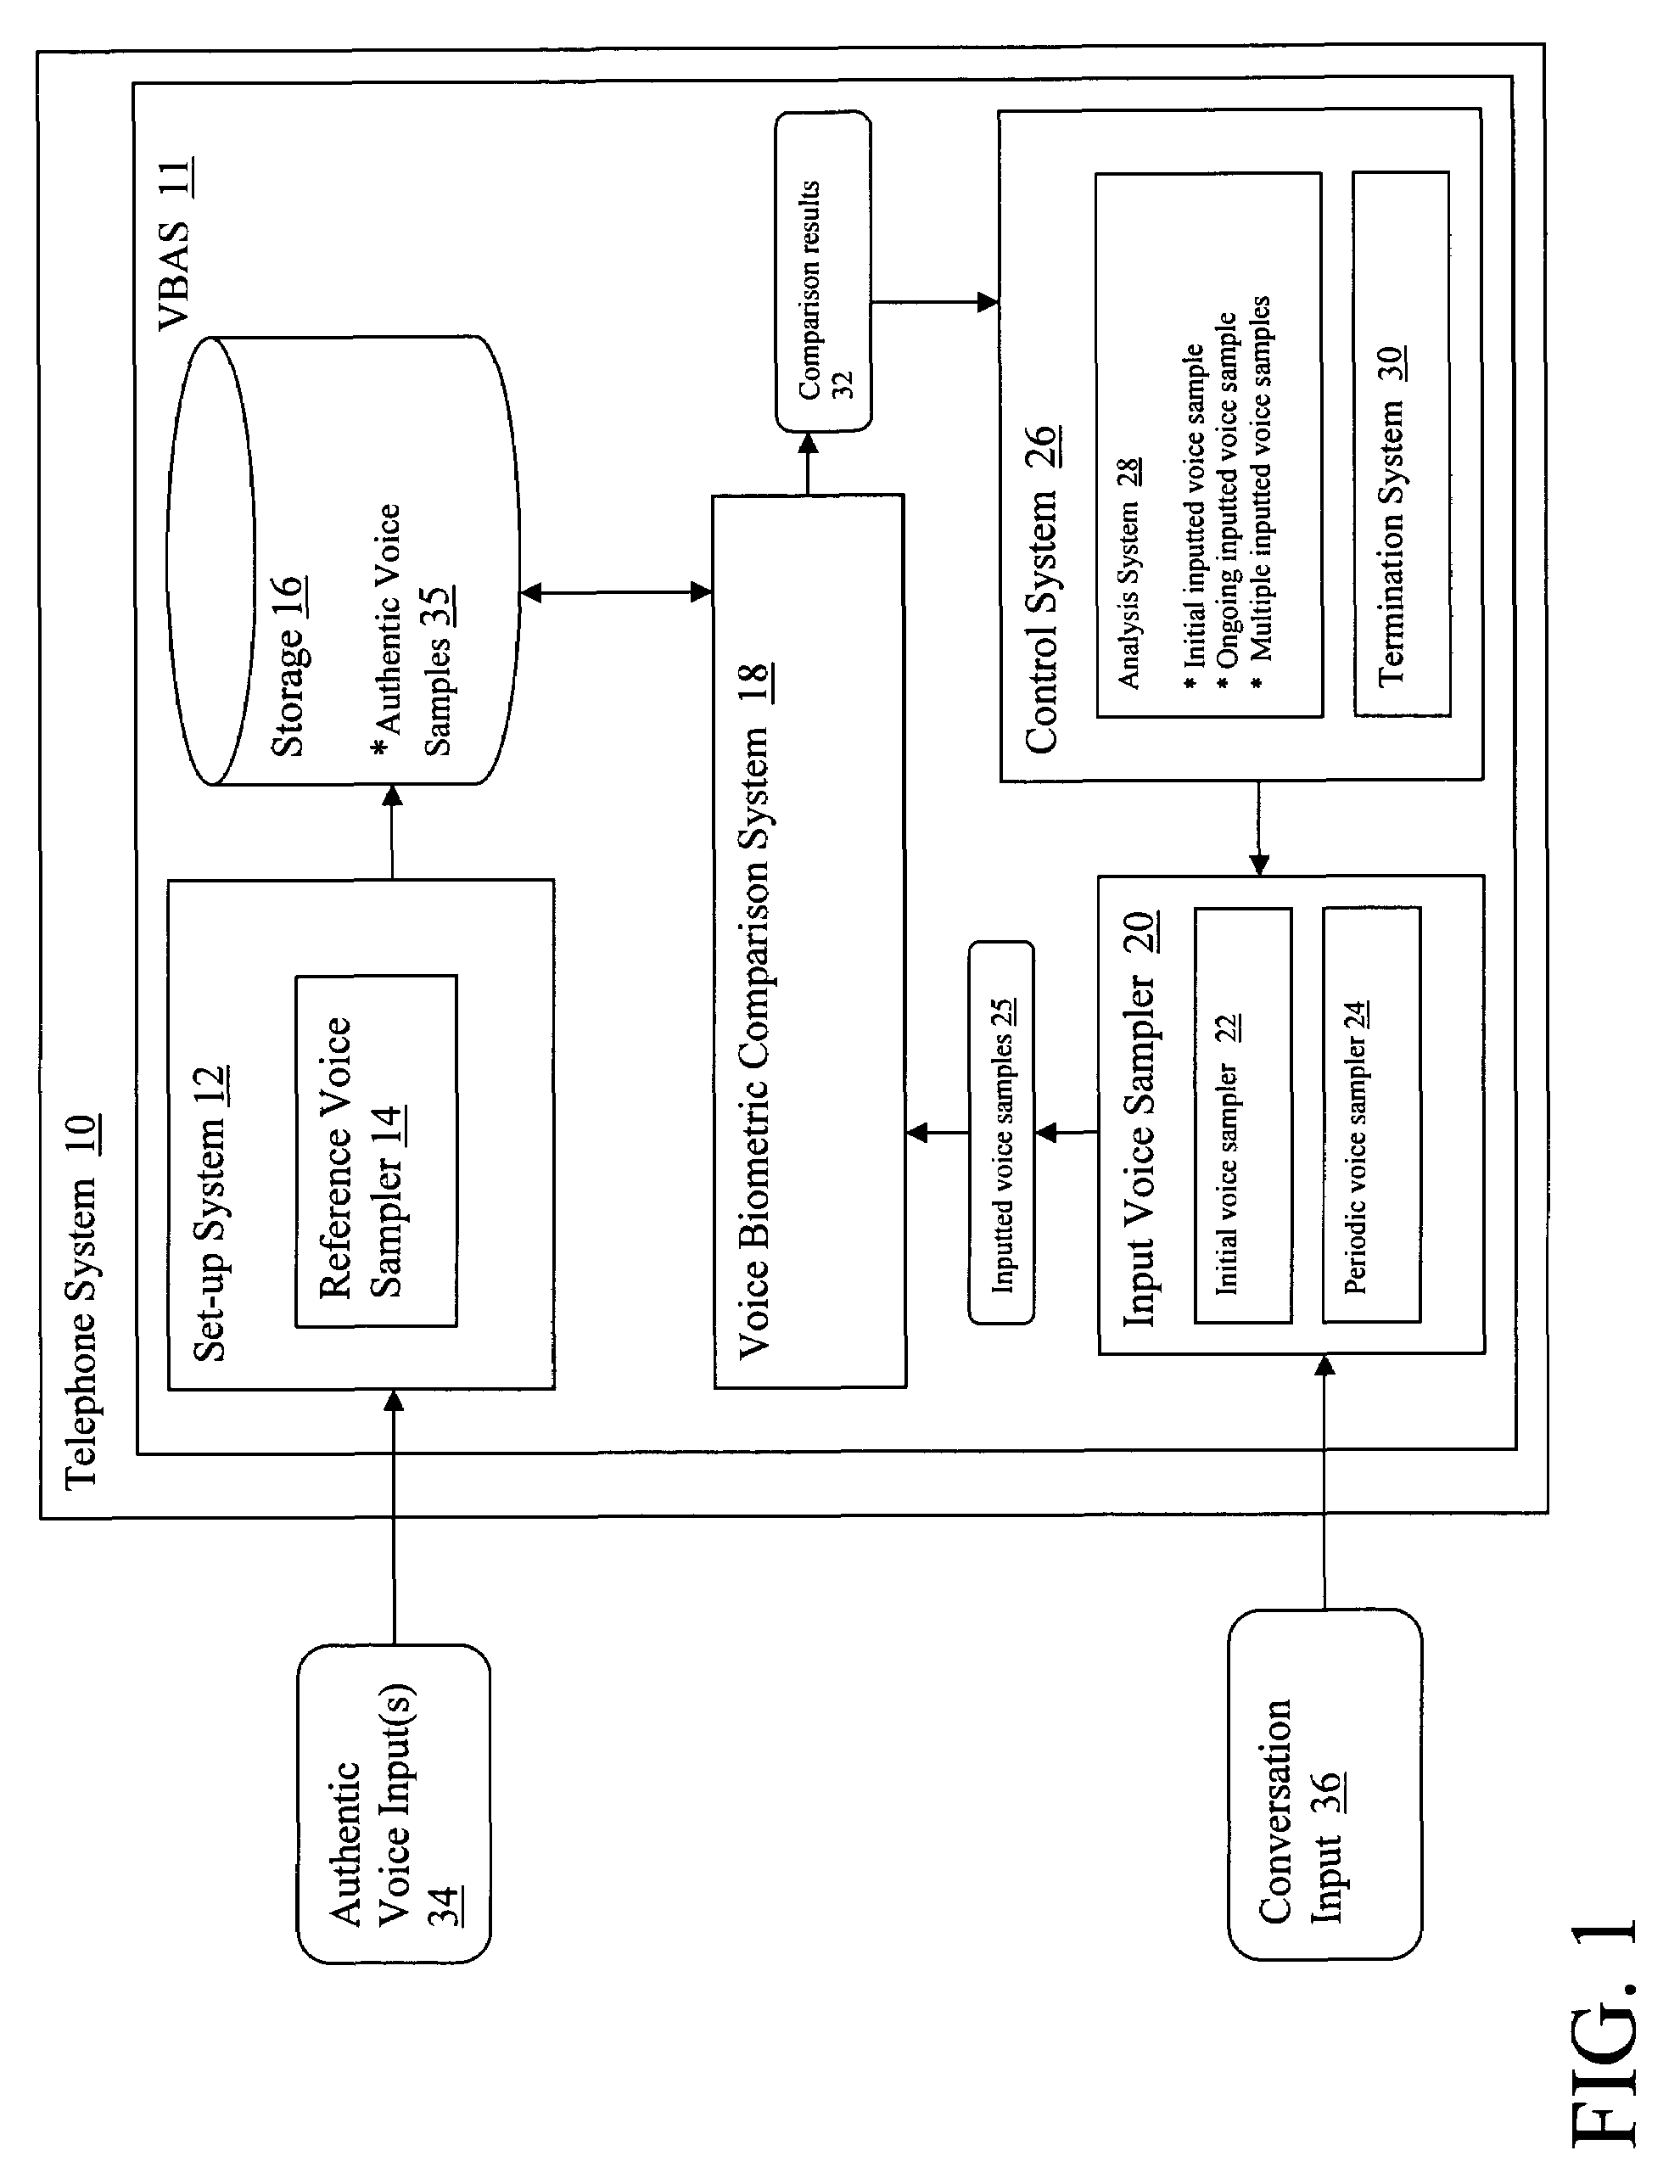 System and method for telephonic voice authentication